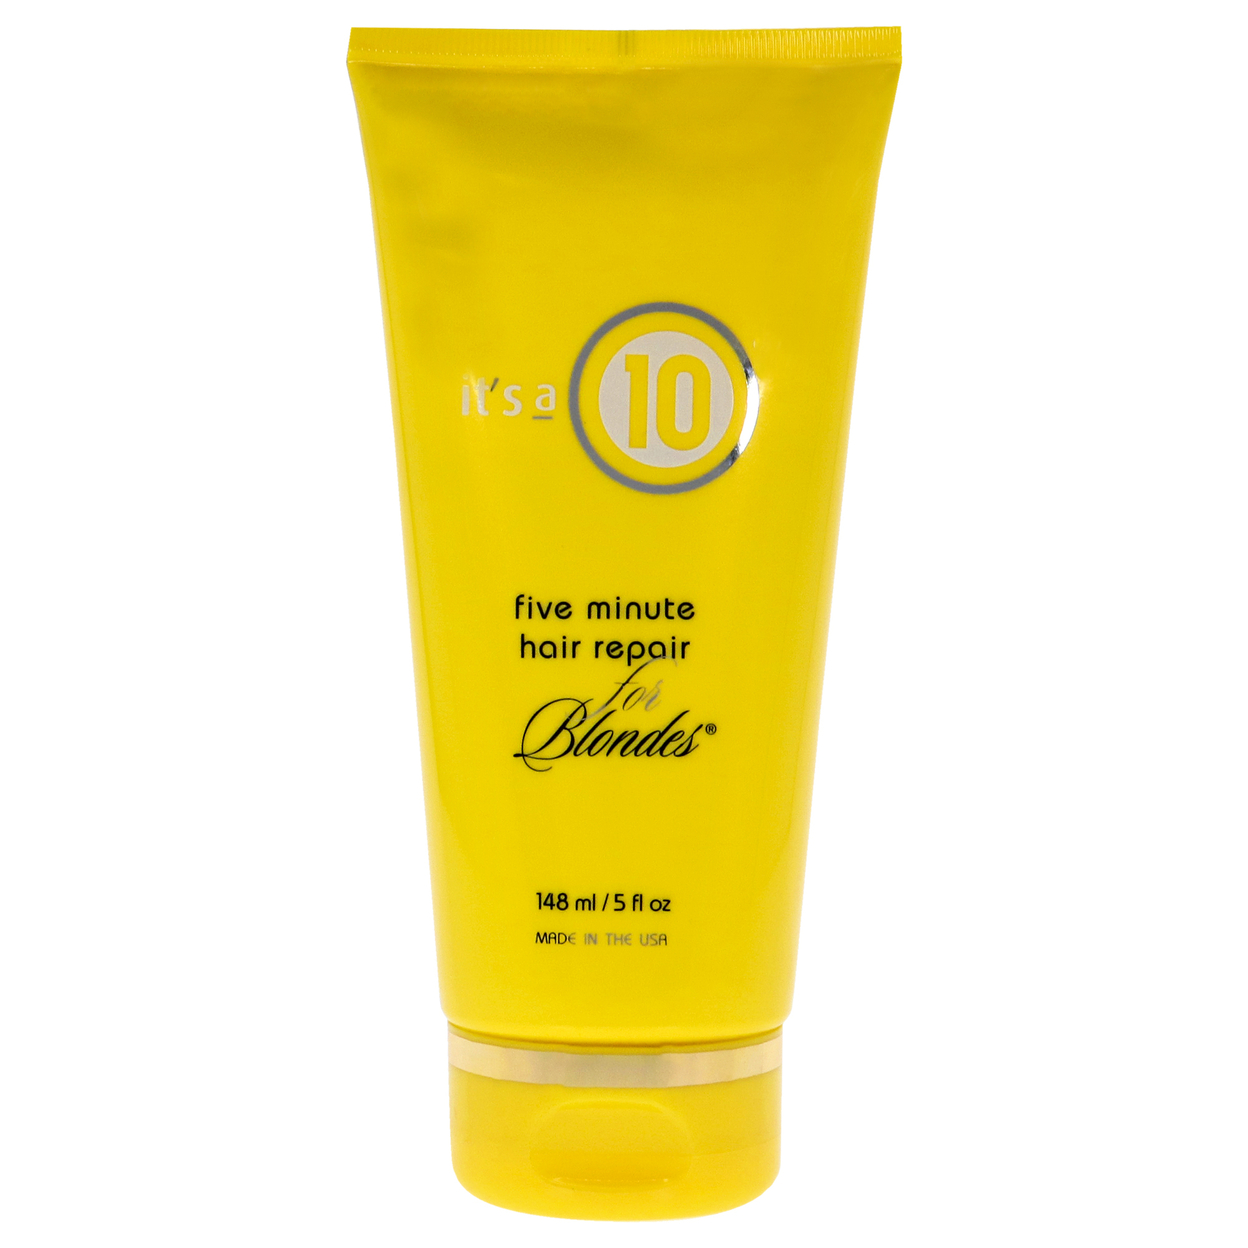 It's A 10 Unisex HAIRCARE Five Minute Hair Repair For Blondes 5 Oz